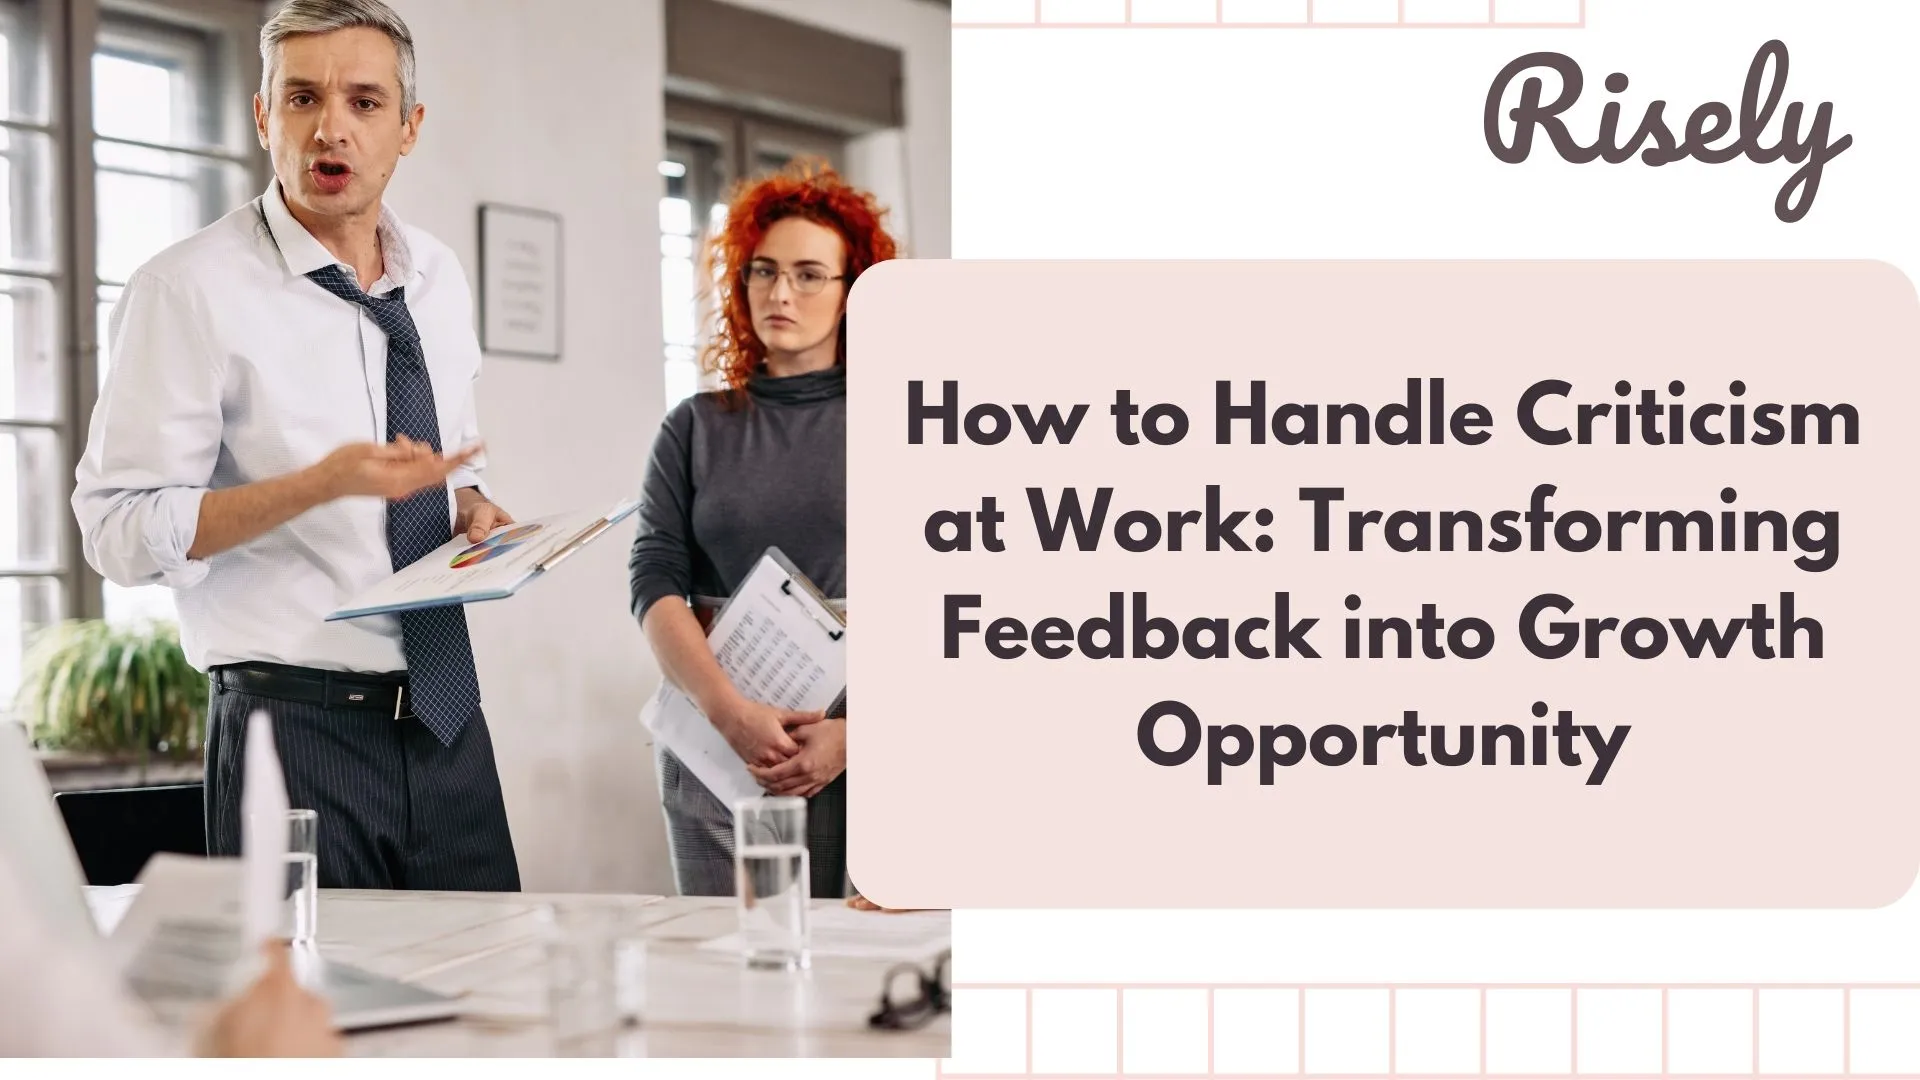 How to Handle Criticism at Work: Transforming Feedback into Growth Opportunity